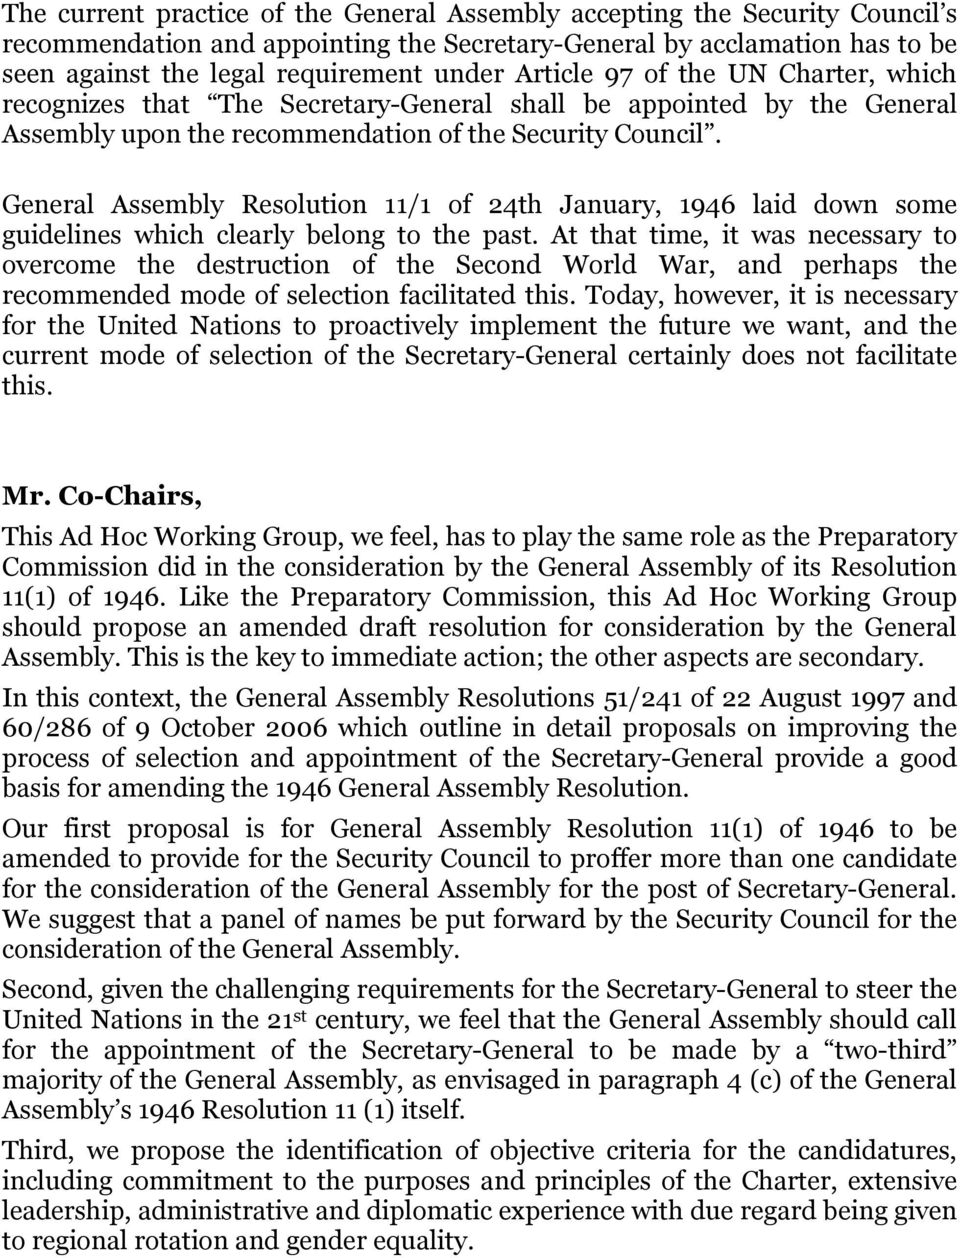 General Assembly Resolution 11/1 of 24th January, 1946 laid down some guidelines which clearly belong to the past.